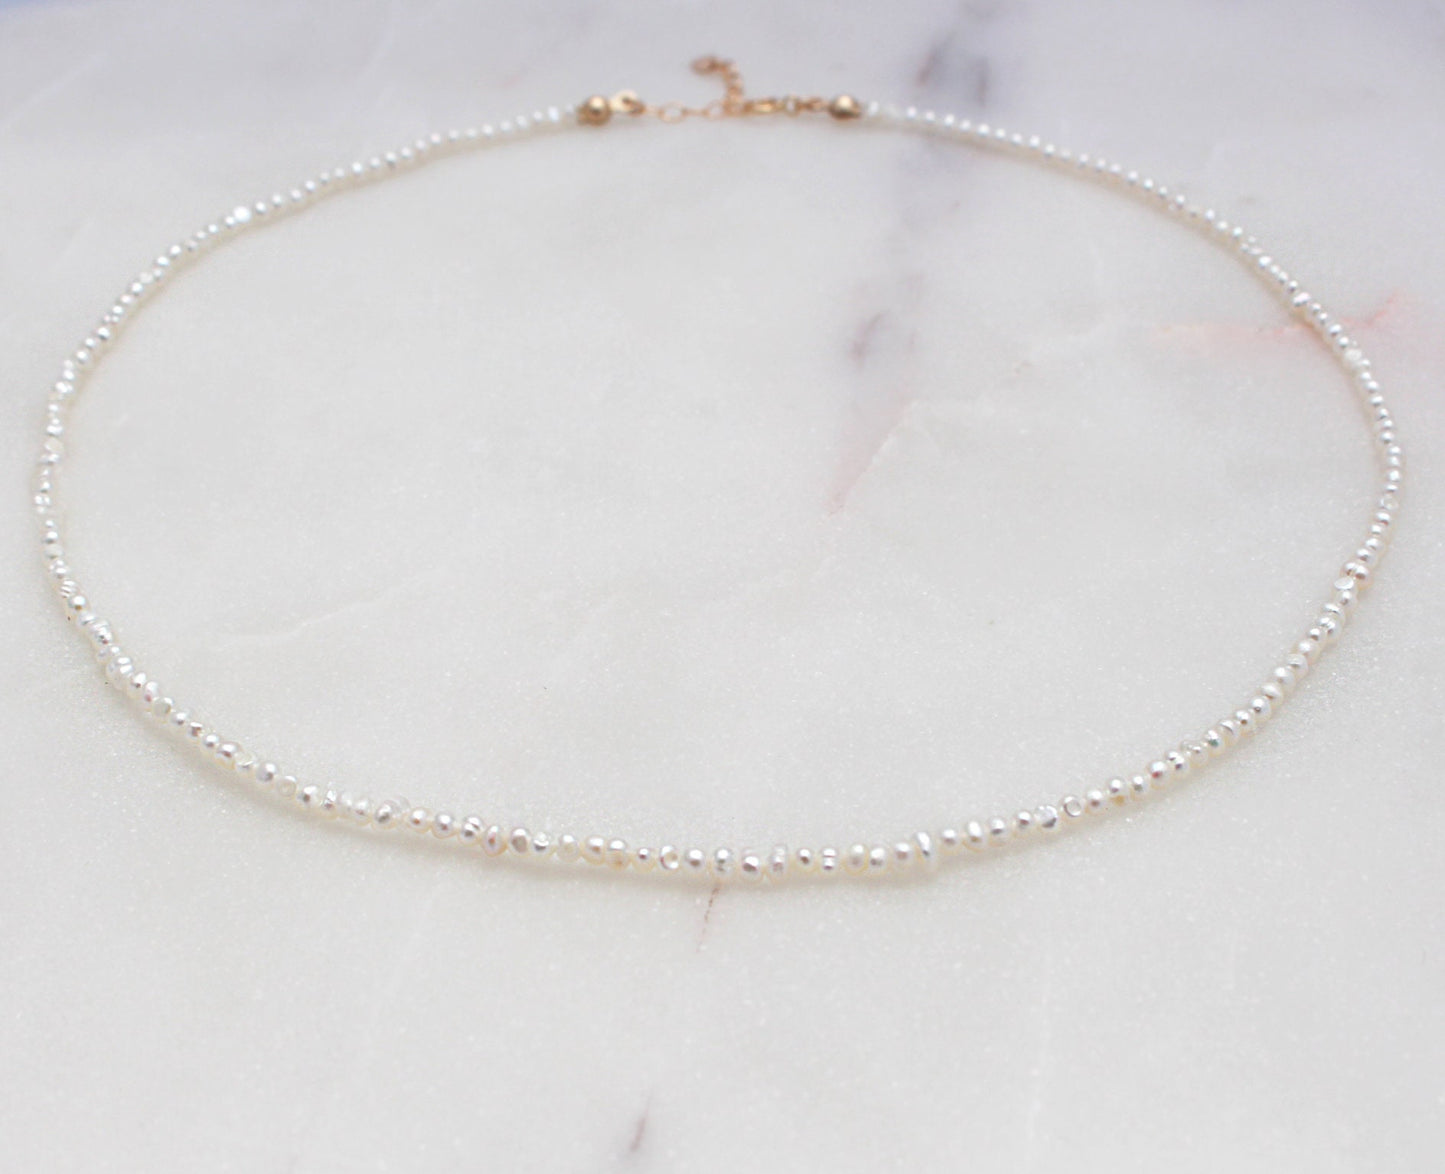 Tiny Potato Pearl Necklace - 14k Gold Filled Clasp & Extender, 2mm White Freshwater Potato Pearl, Seed Pearl